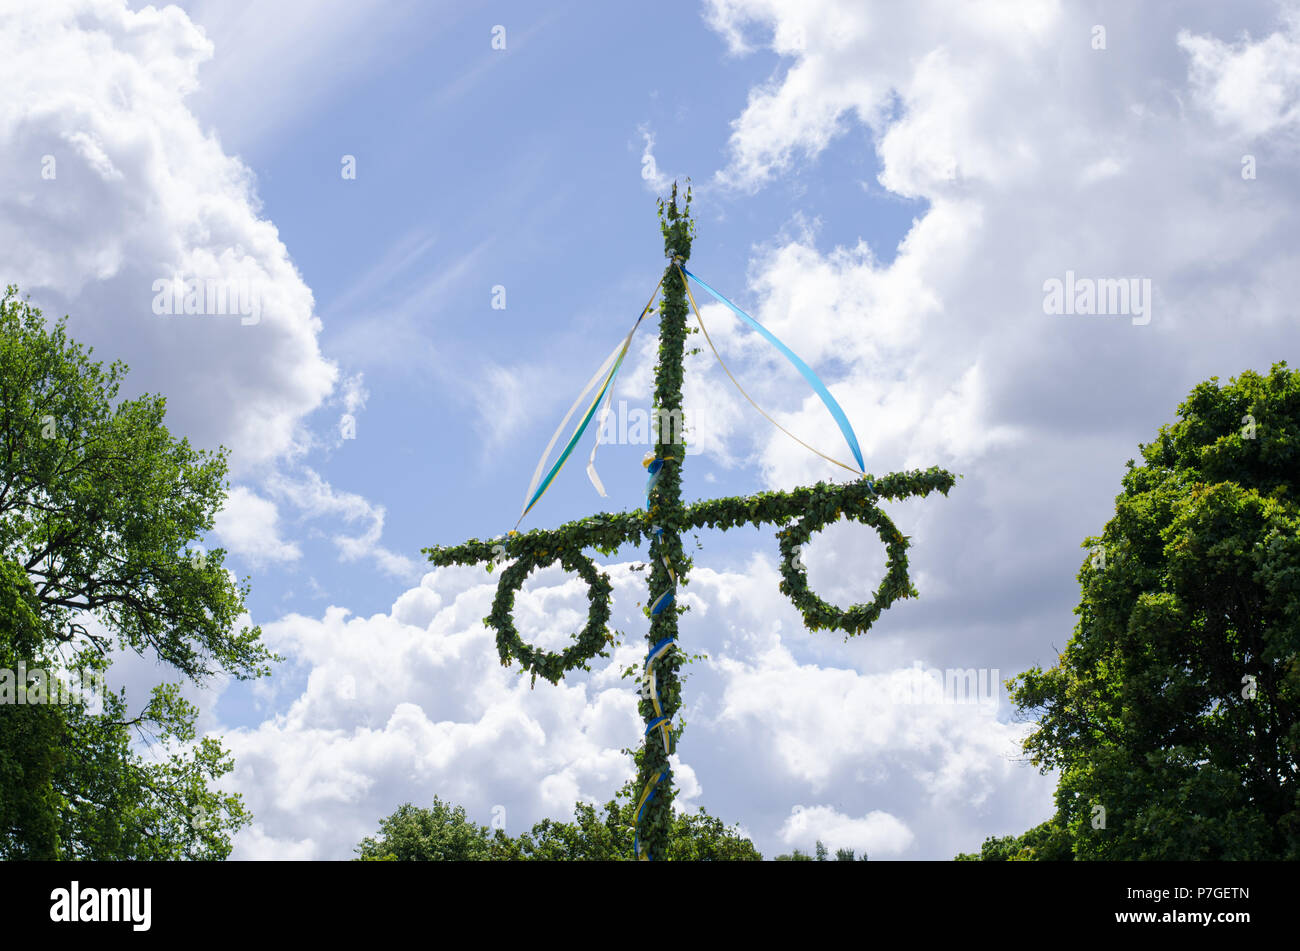 A midsummer pole has been raised for the festivities. Stock Photo